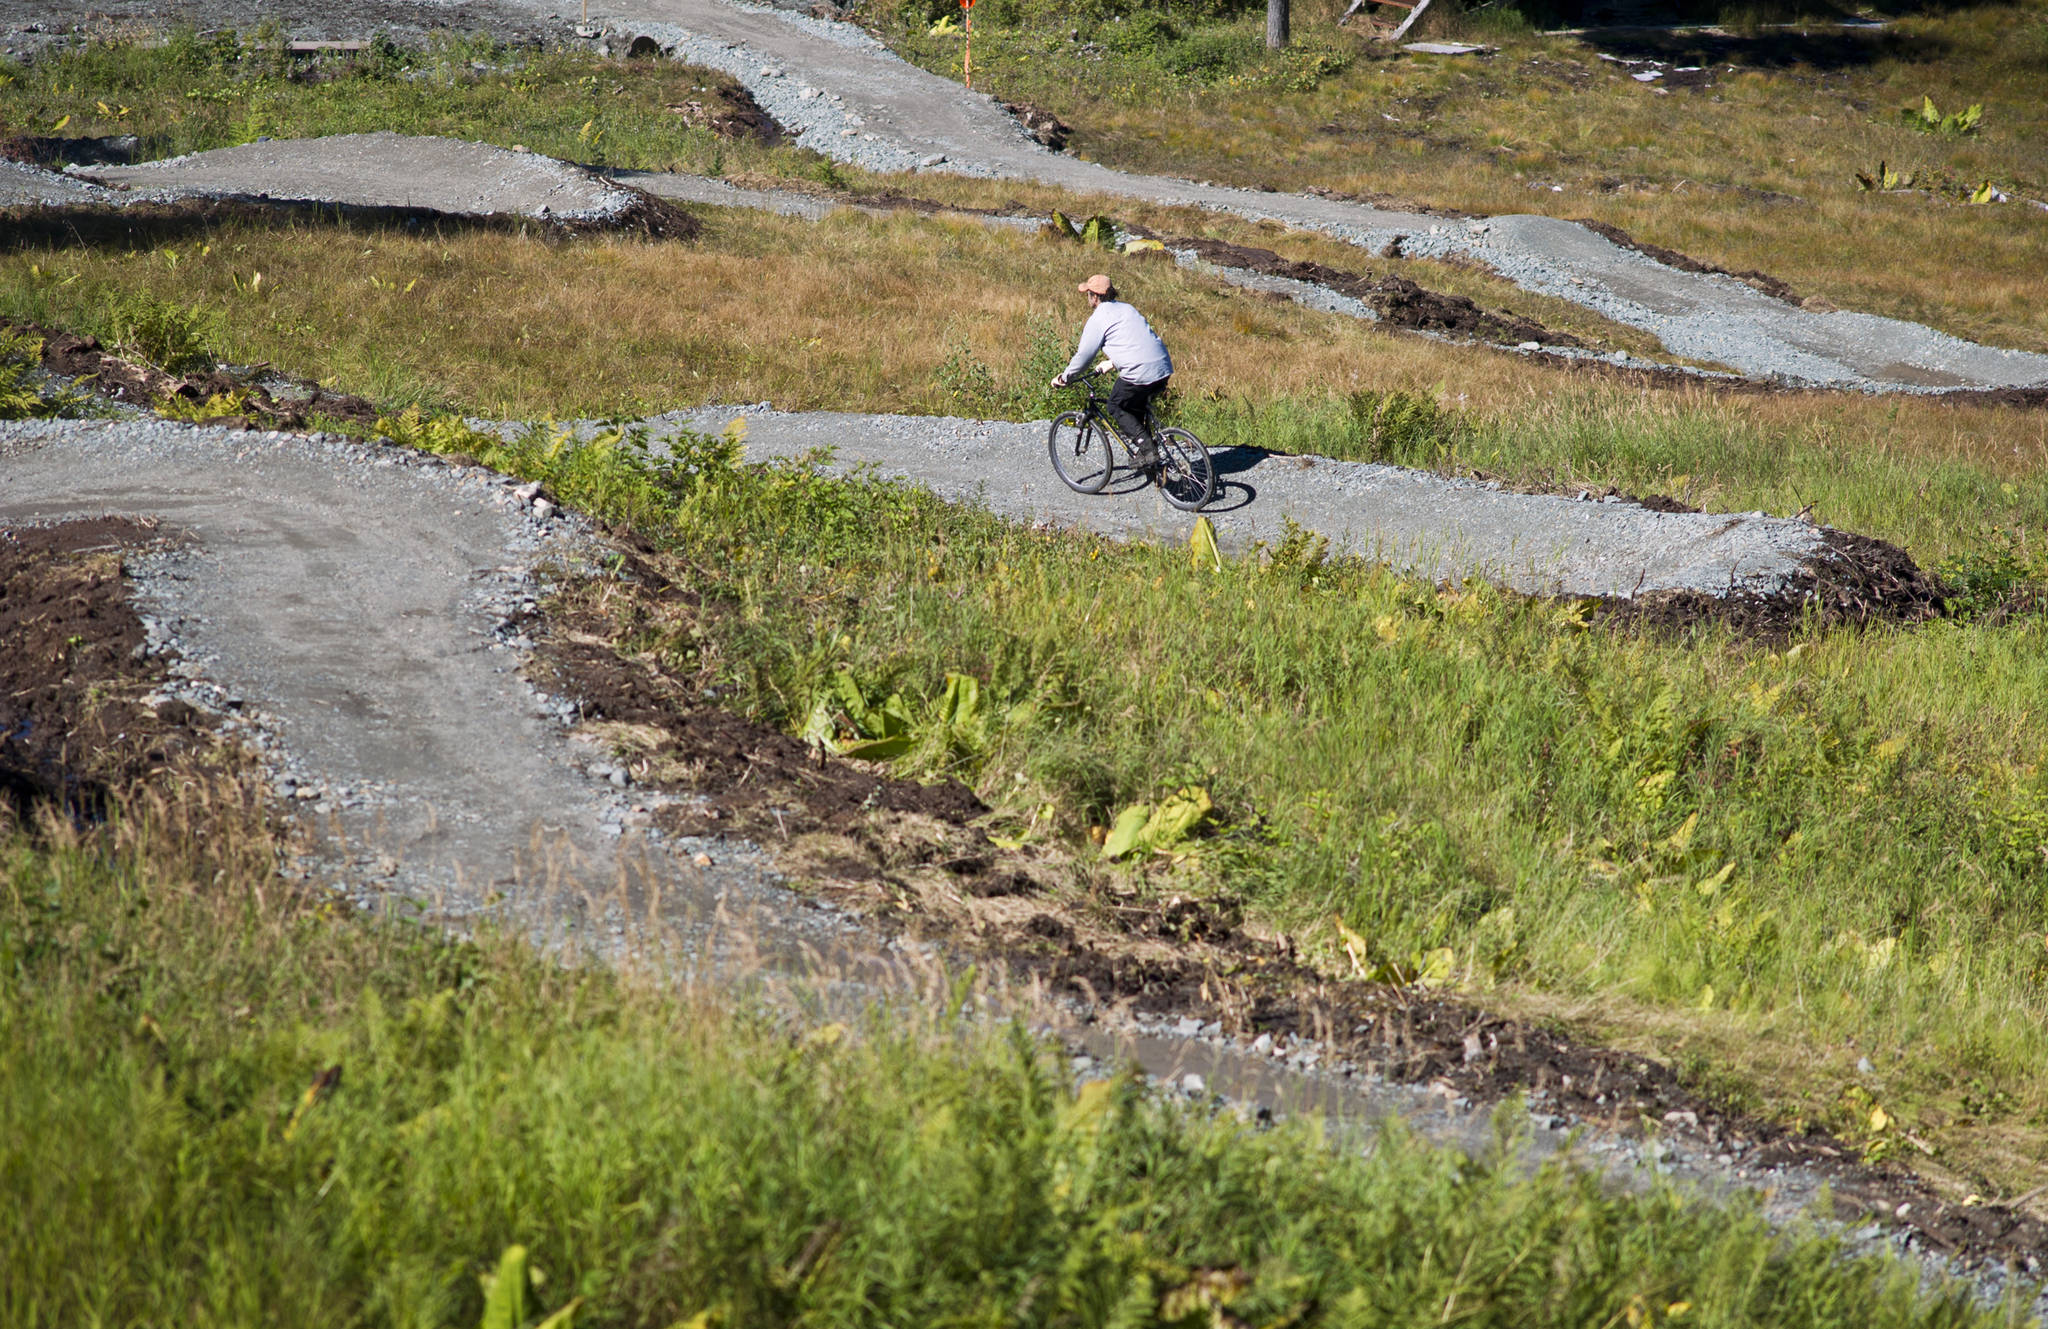 Ron Flint takes a ride on the completed lower section of a mountain bike trail at the Eaglecrest Ski Area August 2015. Volunteers with the Juneau Freewheelers Cycle Club and Eaglecrest staff worked on the downhill trail. (Michael Penn | Juneau Empire)